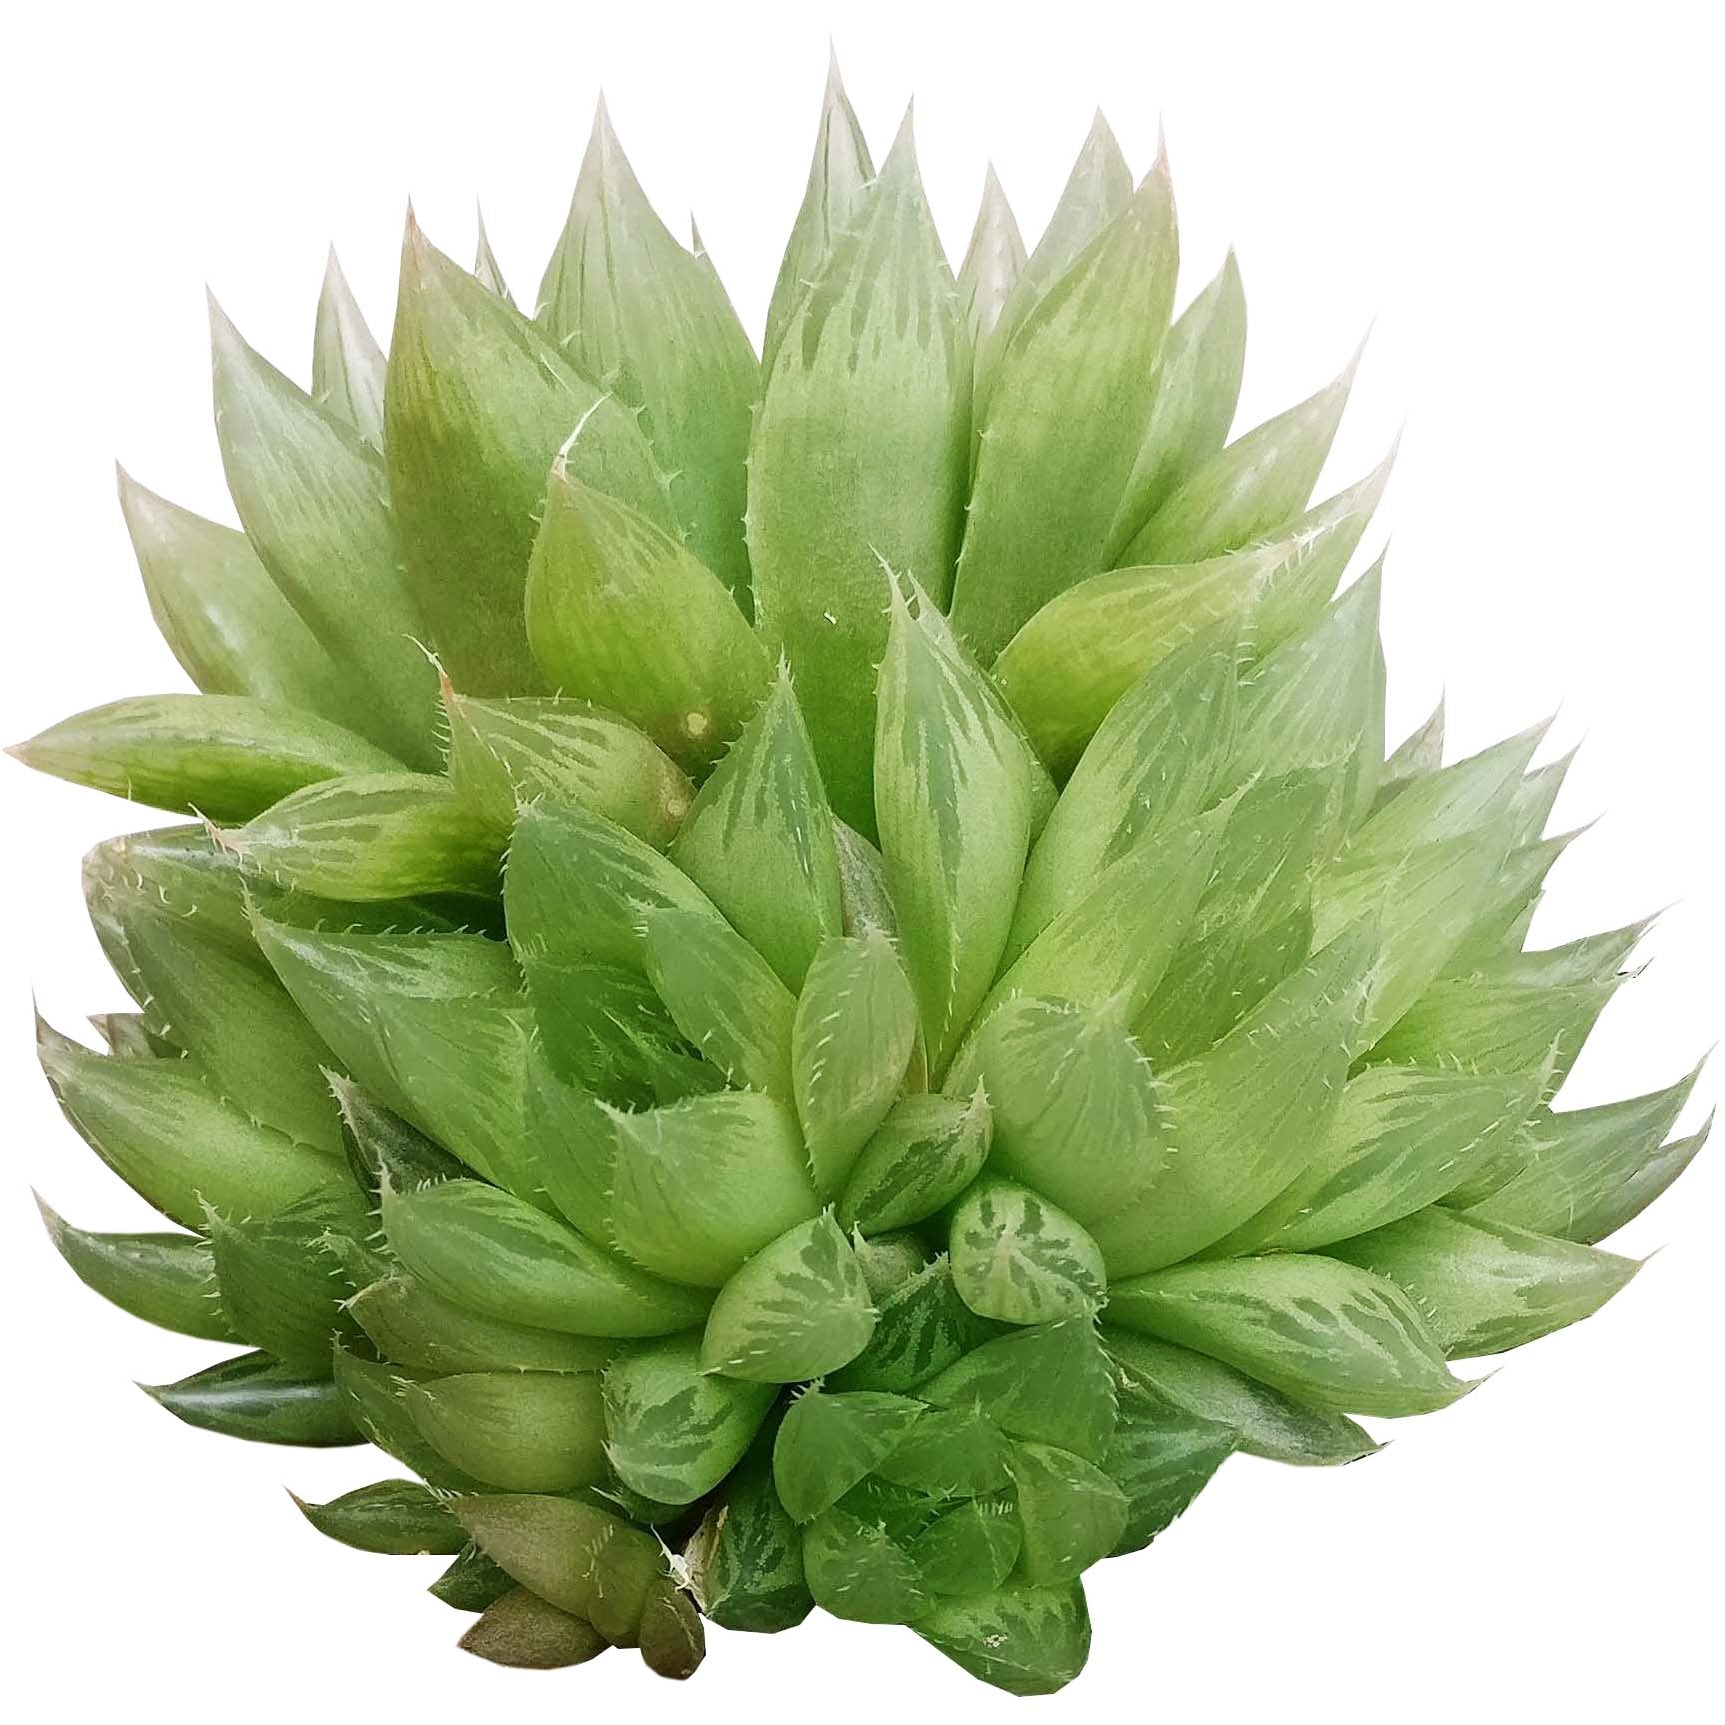 Haworthia Cooperi for sale, succulents shop in California, how to grow succulents, monthly succulents, indoor succulents, succulent care tips, succulent care, succulent subscription, cactus, Haworthia Cooperi in California, How to grow Haworthia Cooperi. indoor succulents.